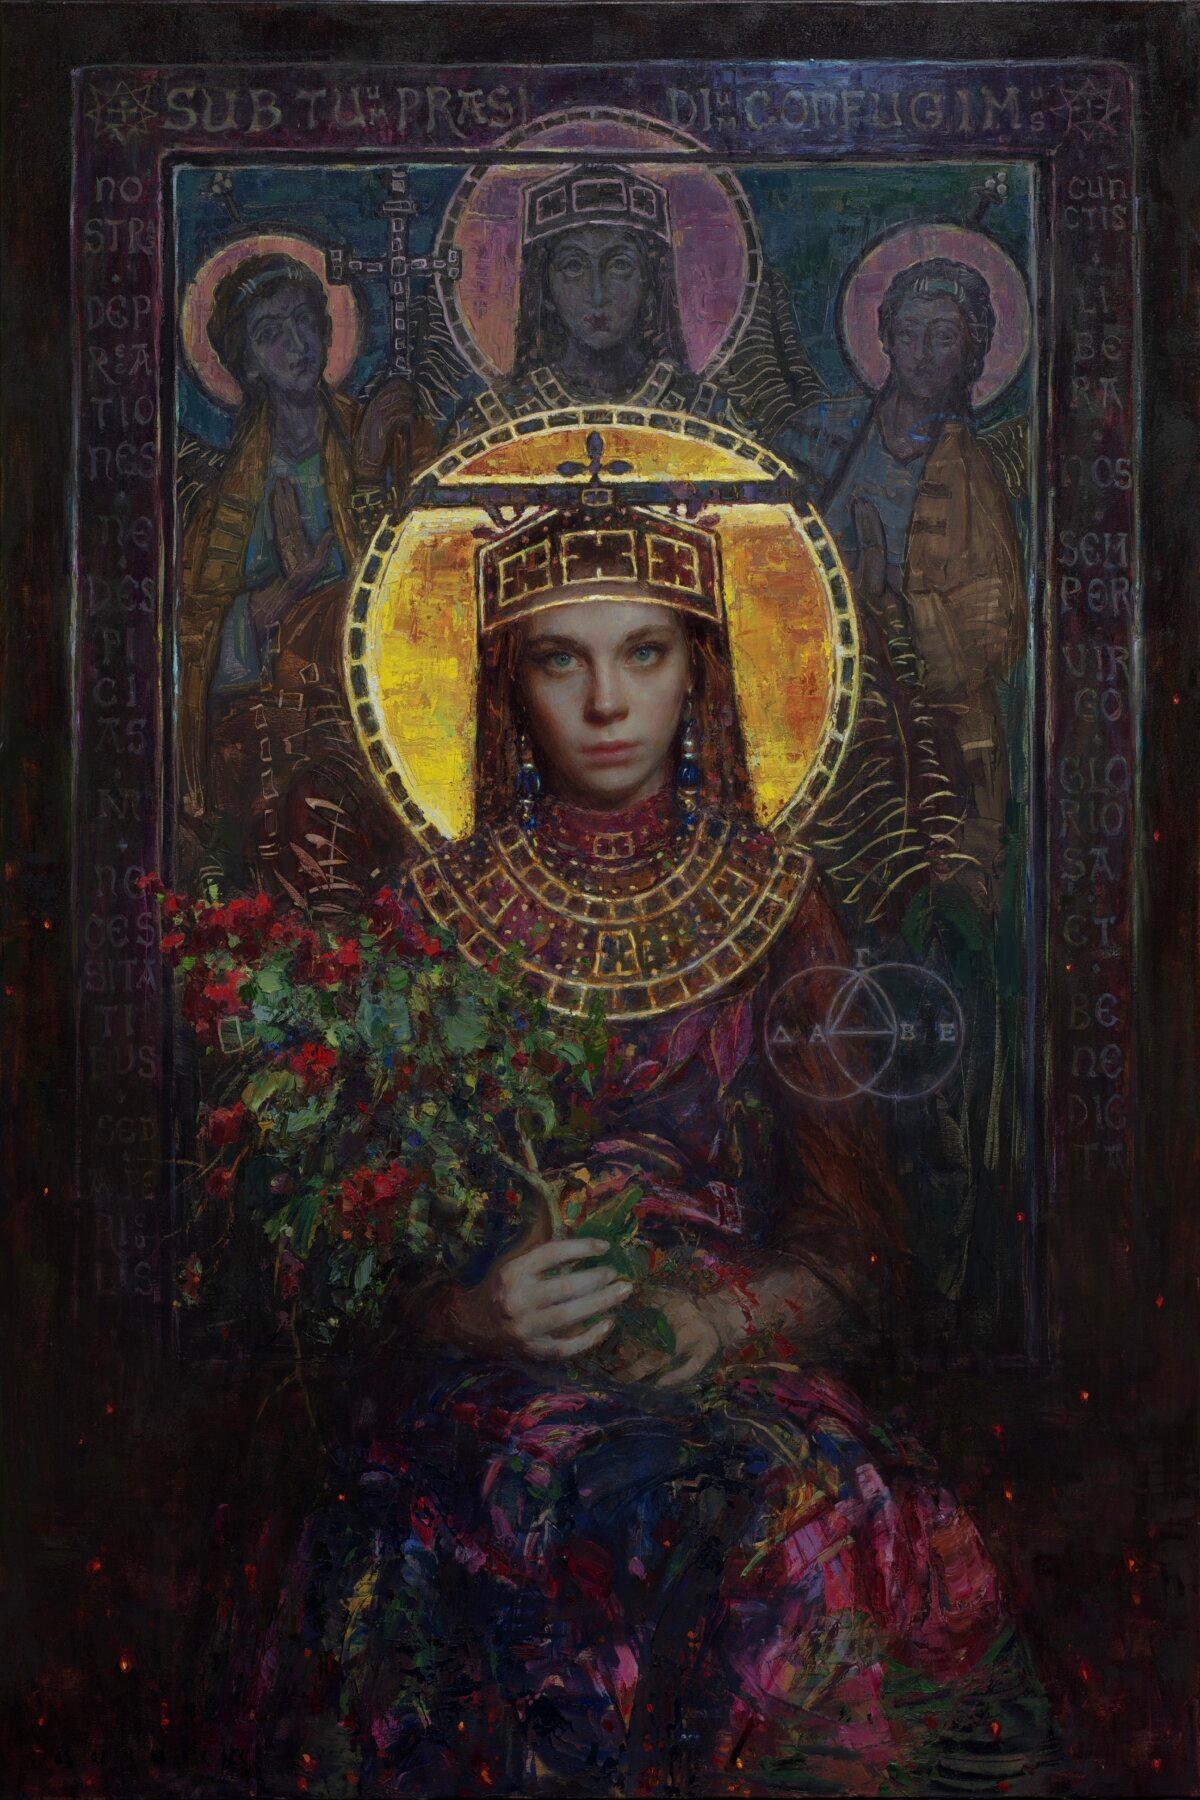 “Hypatia and the Tree of Knowledge” by Scott Burdick of North Carolina. Oil on canvas; 60 inches by 40 inches. (Courtesy of the Portrait Society of America)